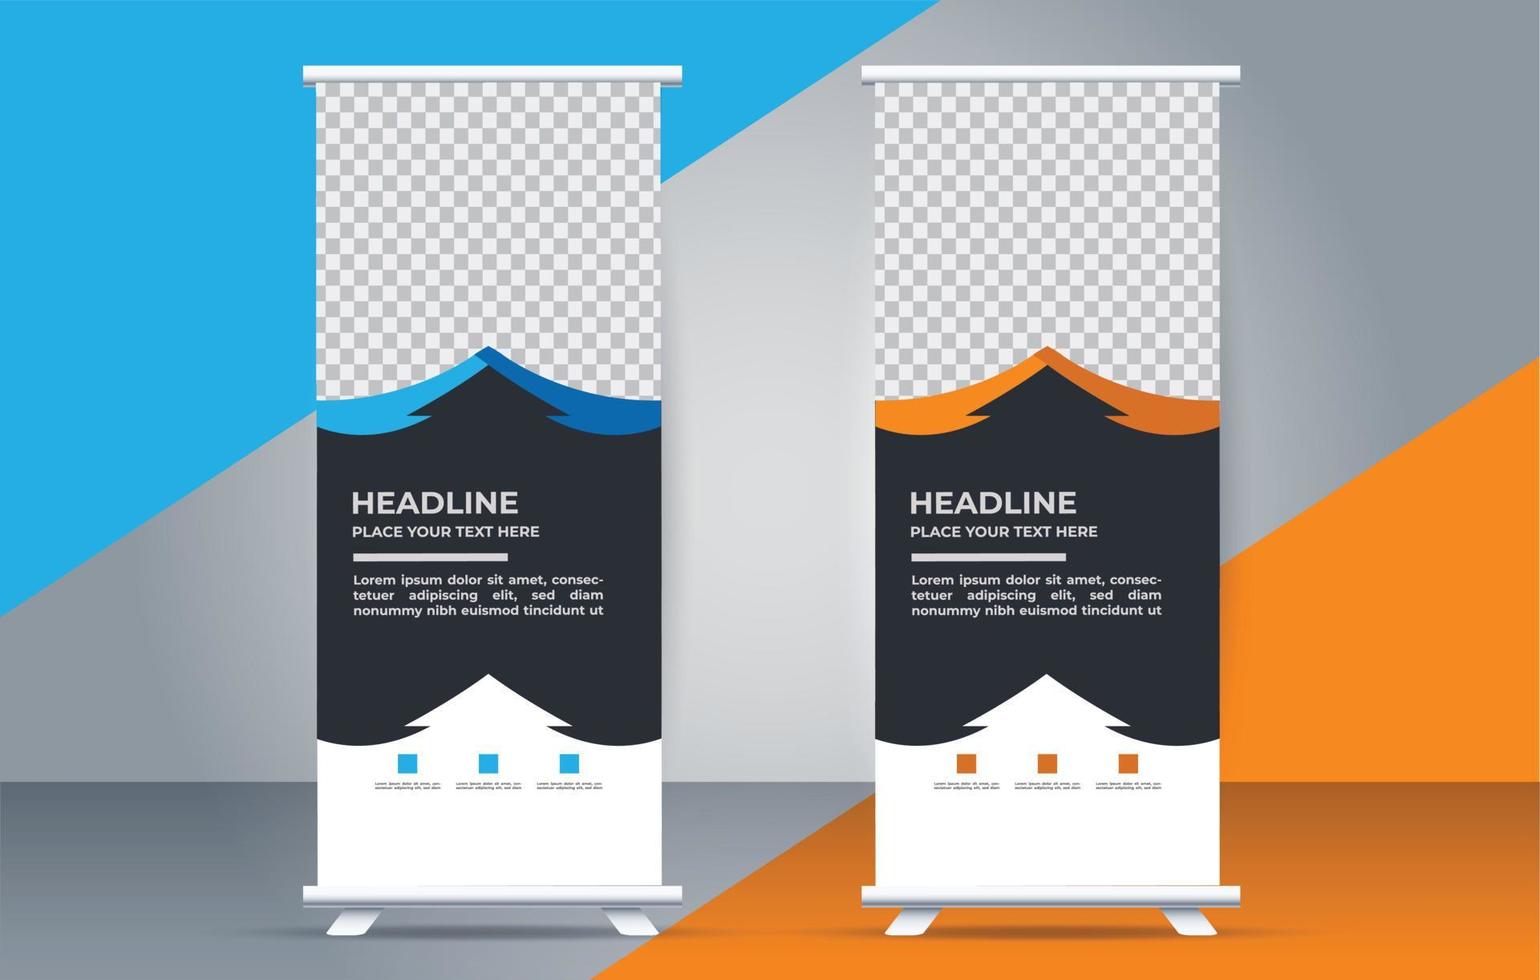 Roll up banner template with modern shapes vector